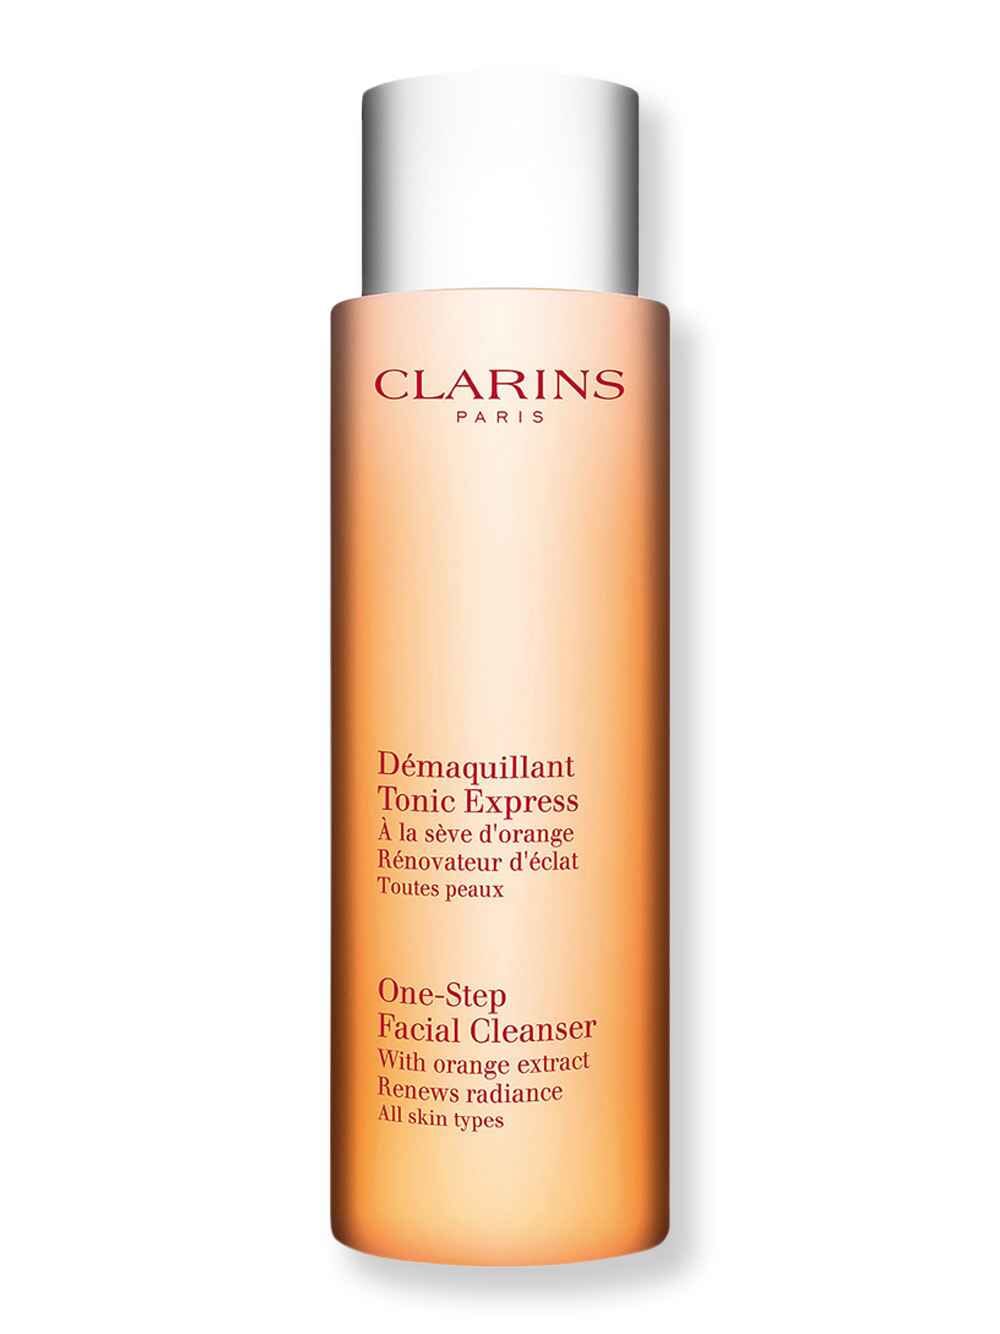 Clarins Clarins One-Step Facial Cleanser 6.8 fl oz200 ml Face Cleansers 